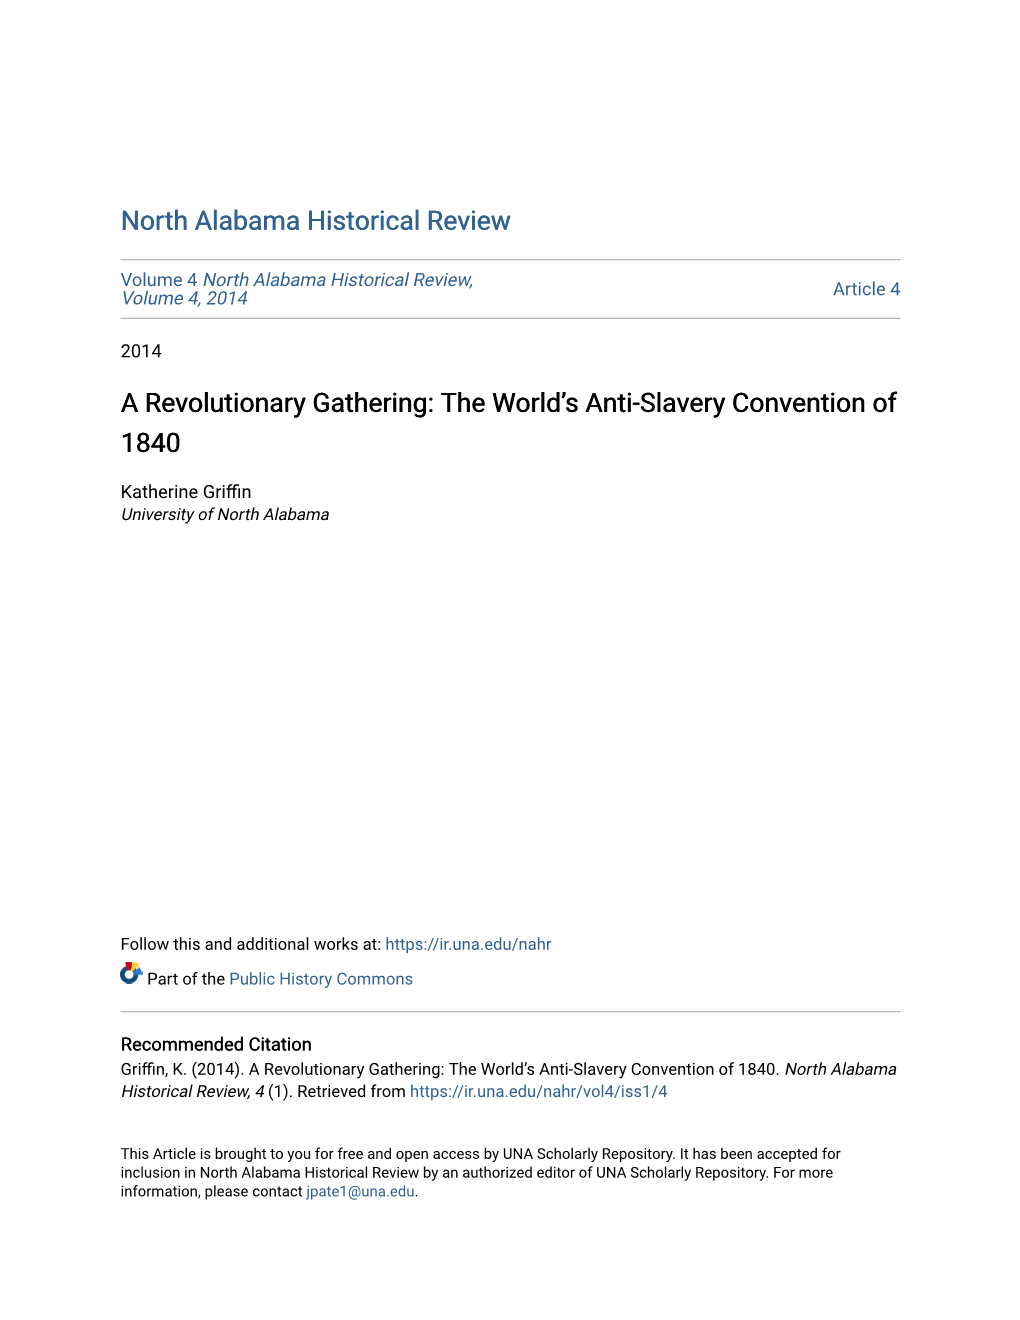 The World's Anti-Slavery Convention of 1840